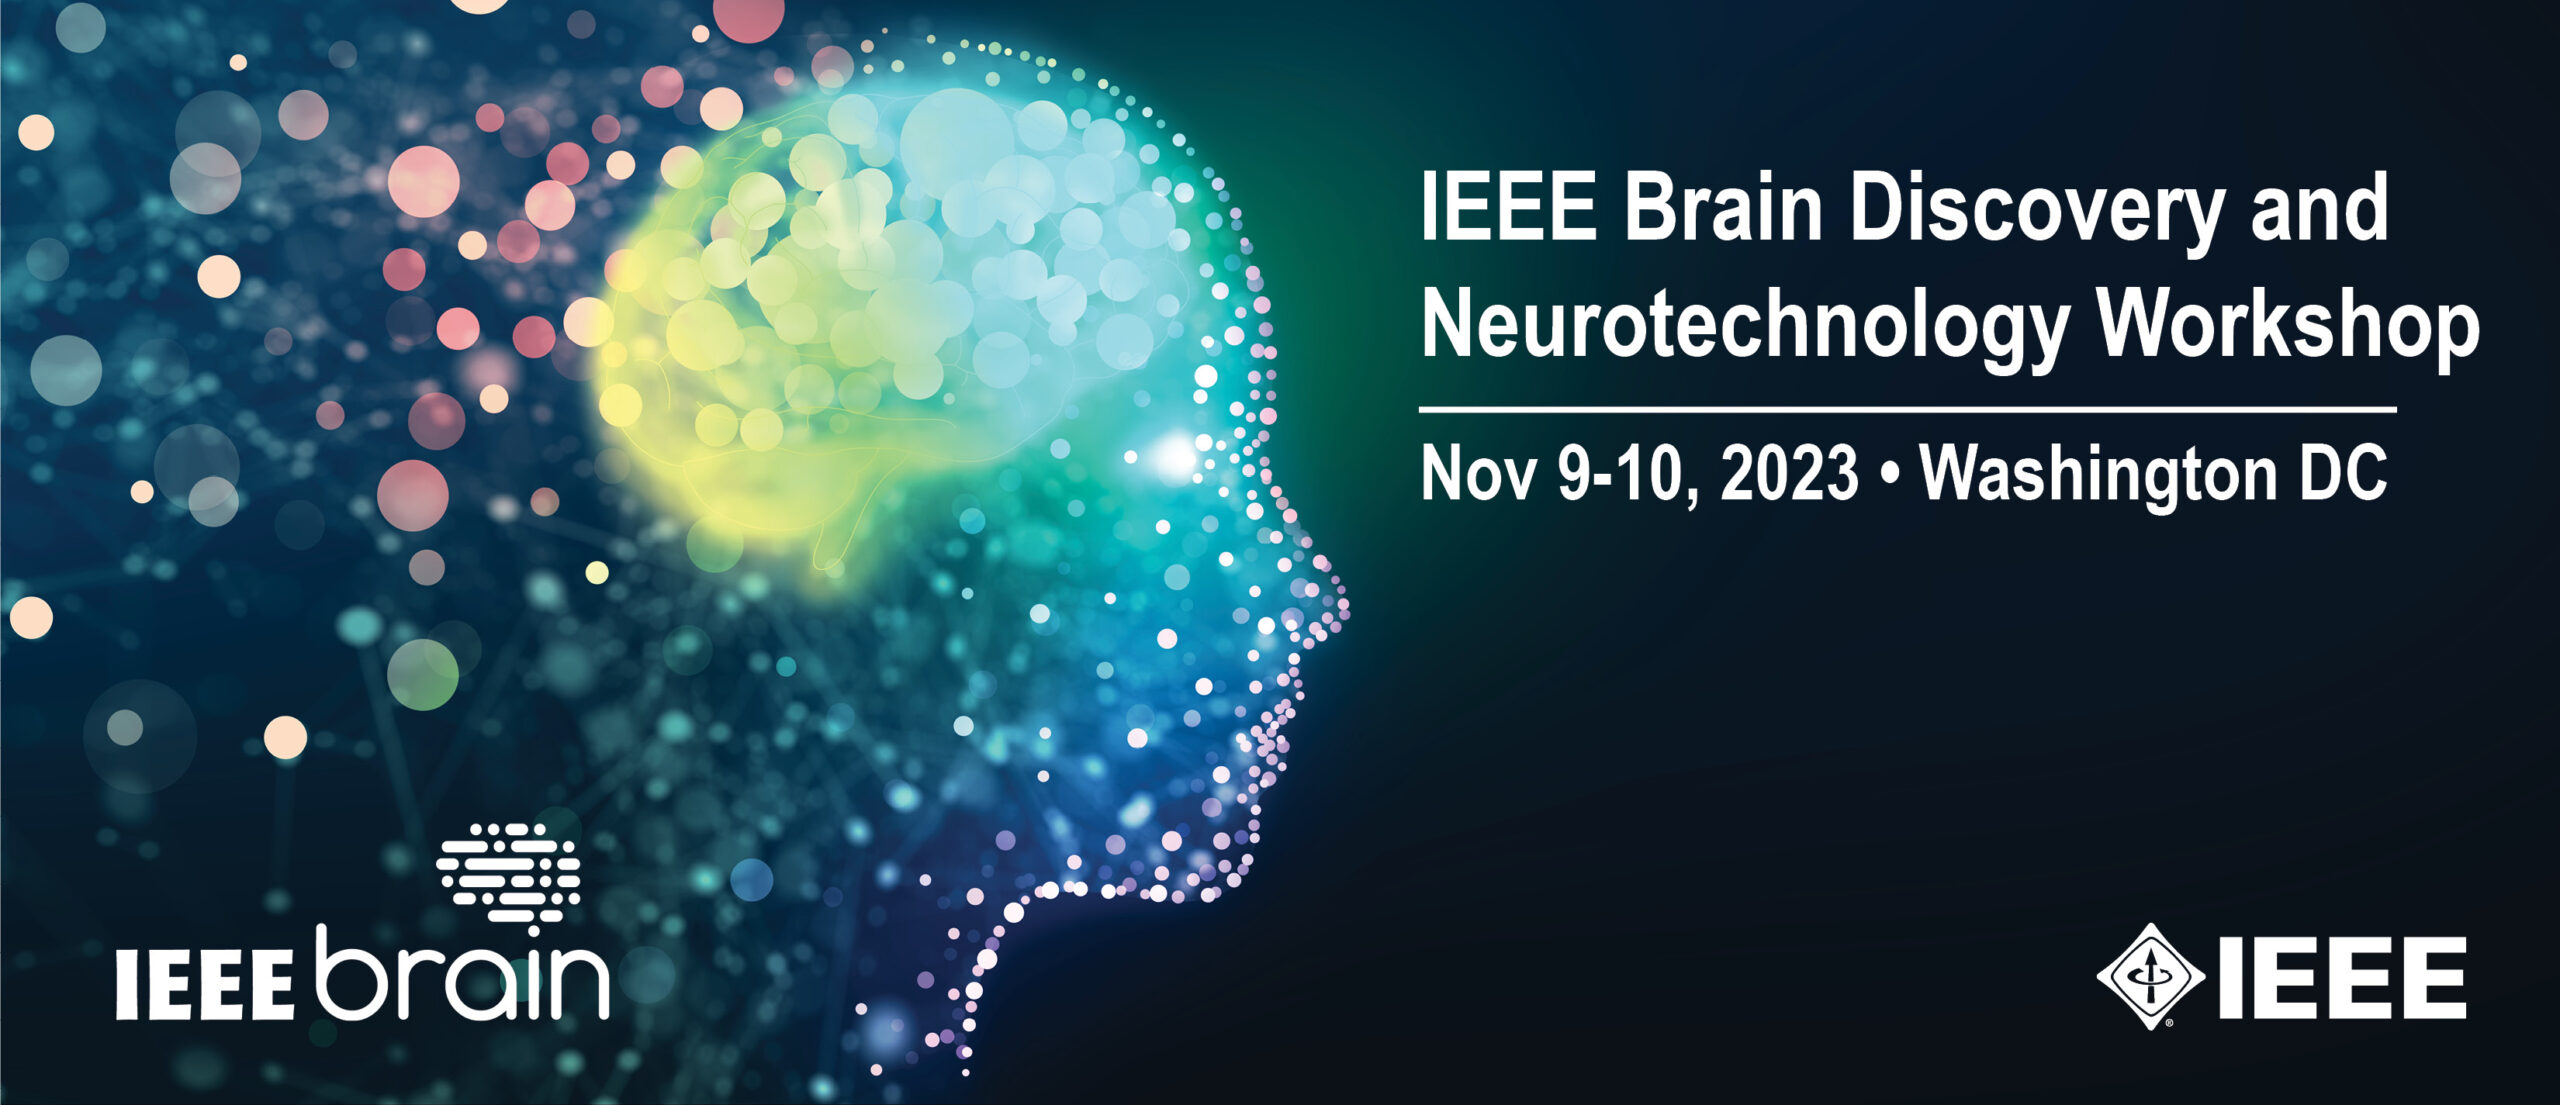 IEEE Brain Discovery and Neurotechnology Workshop